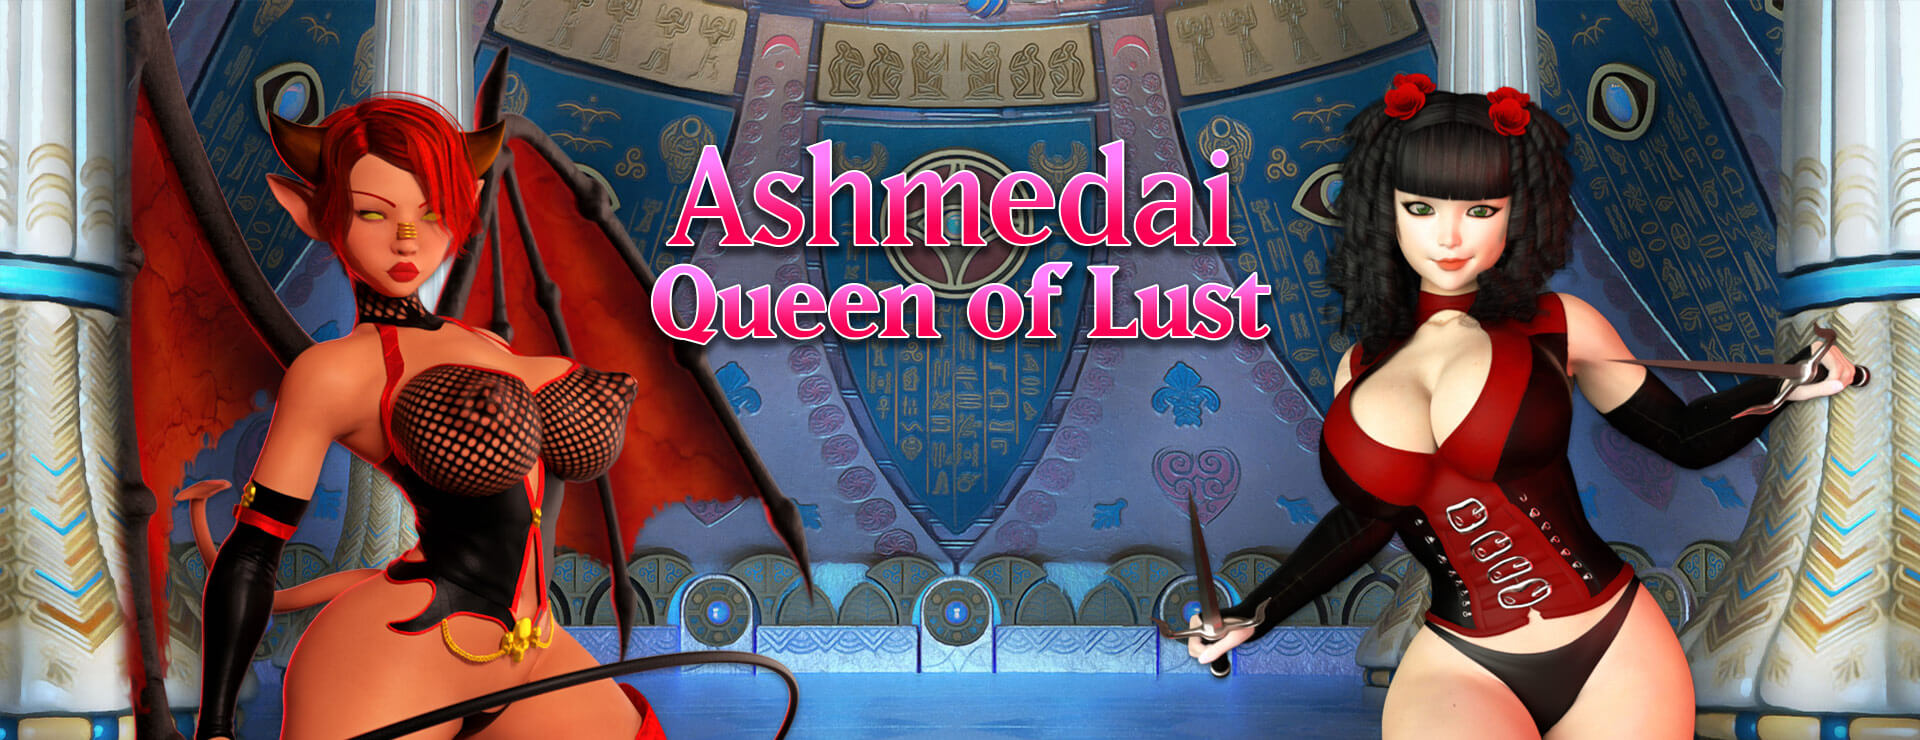 Ashmedai - Queen of Lust - RPG ゲーム